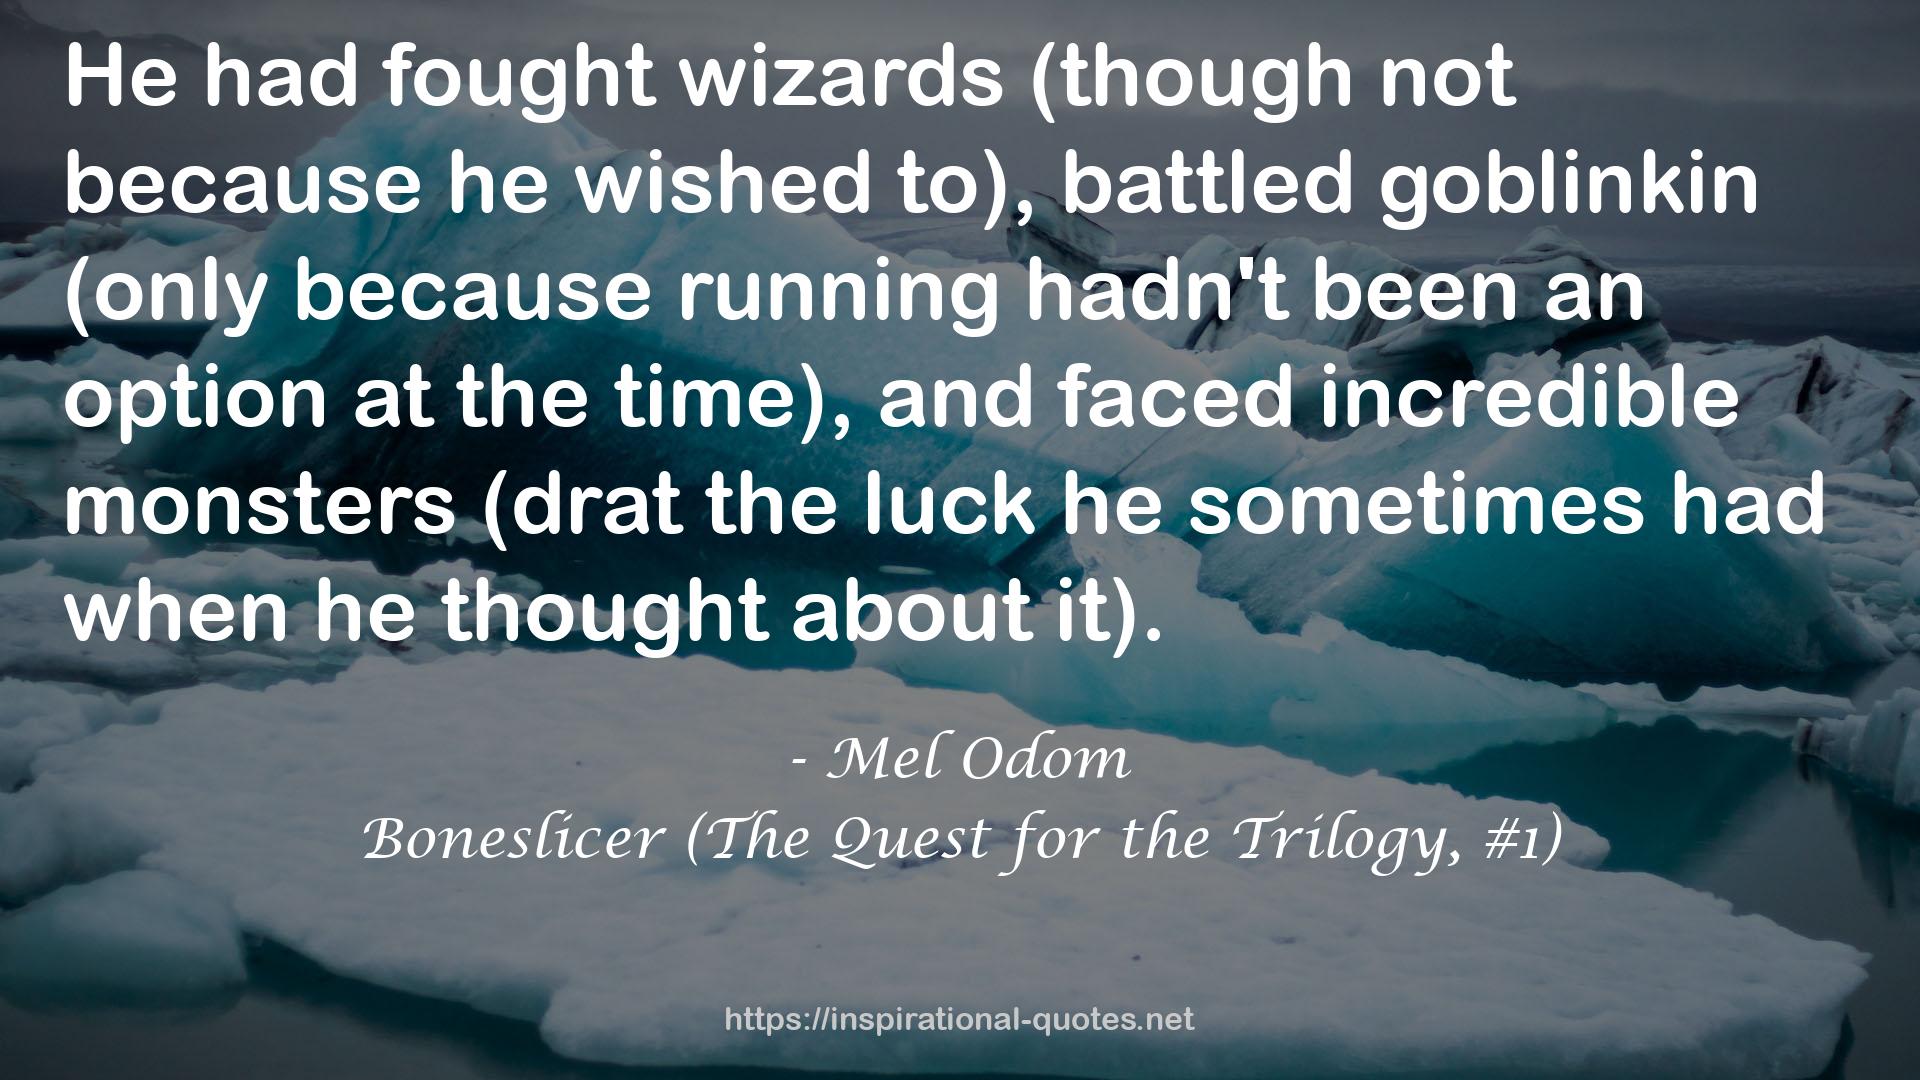 Boneslicer (The Quest for the Trilogy, #1) QUOTES